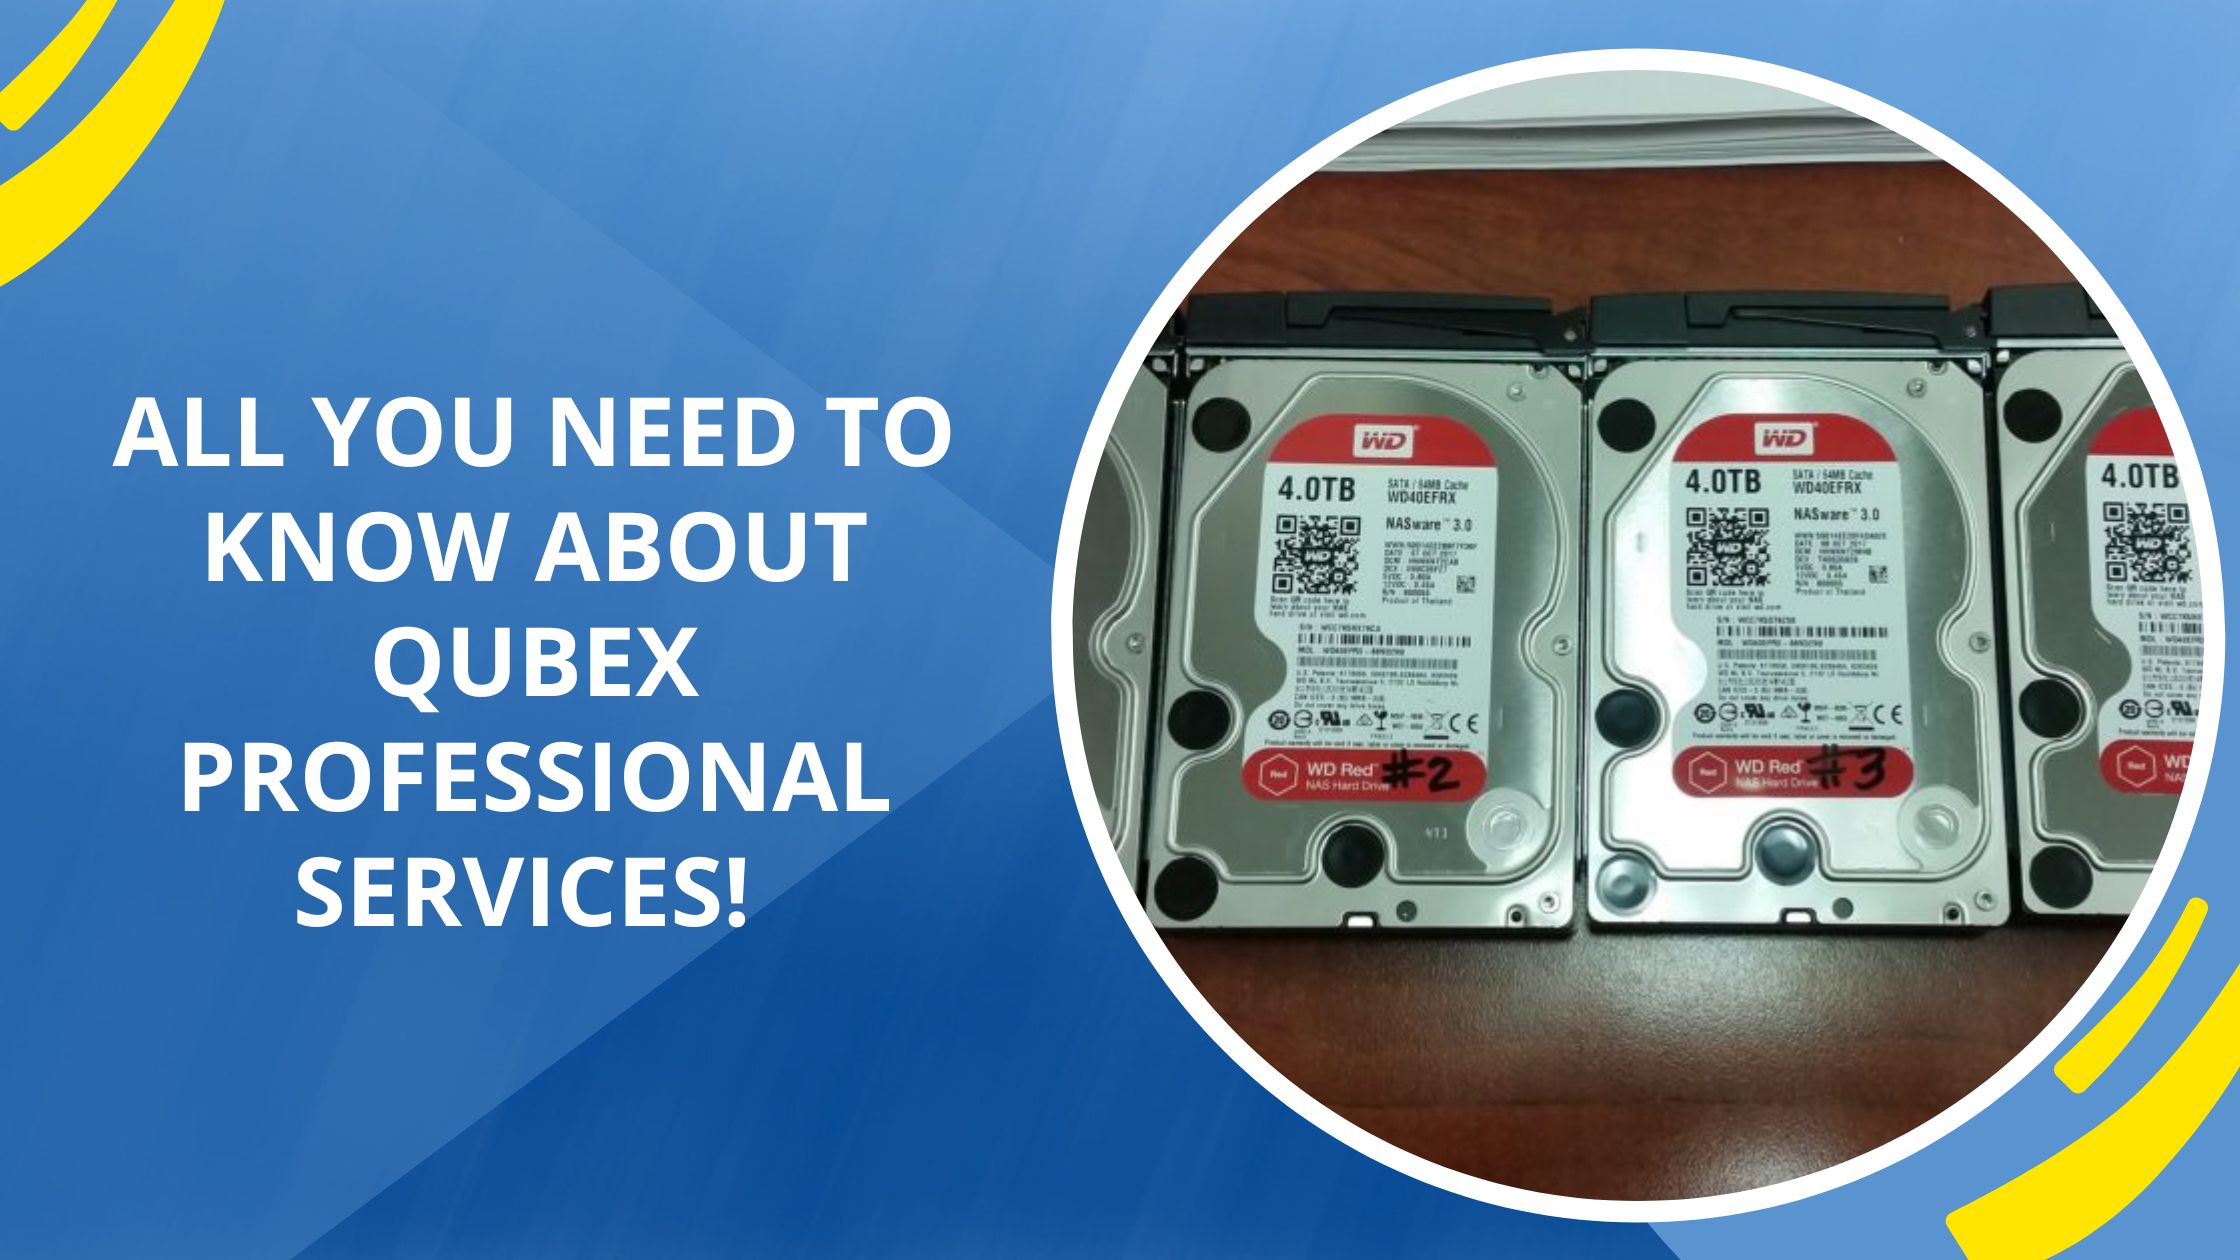 ALL YOU NEED TO KNOW ABOUT QUBEX PROFESSIONAL SERVICES!